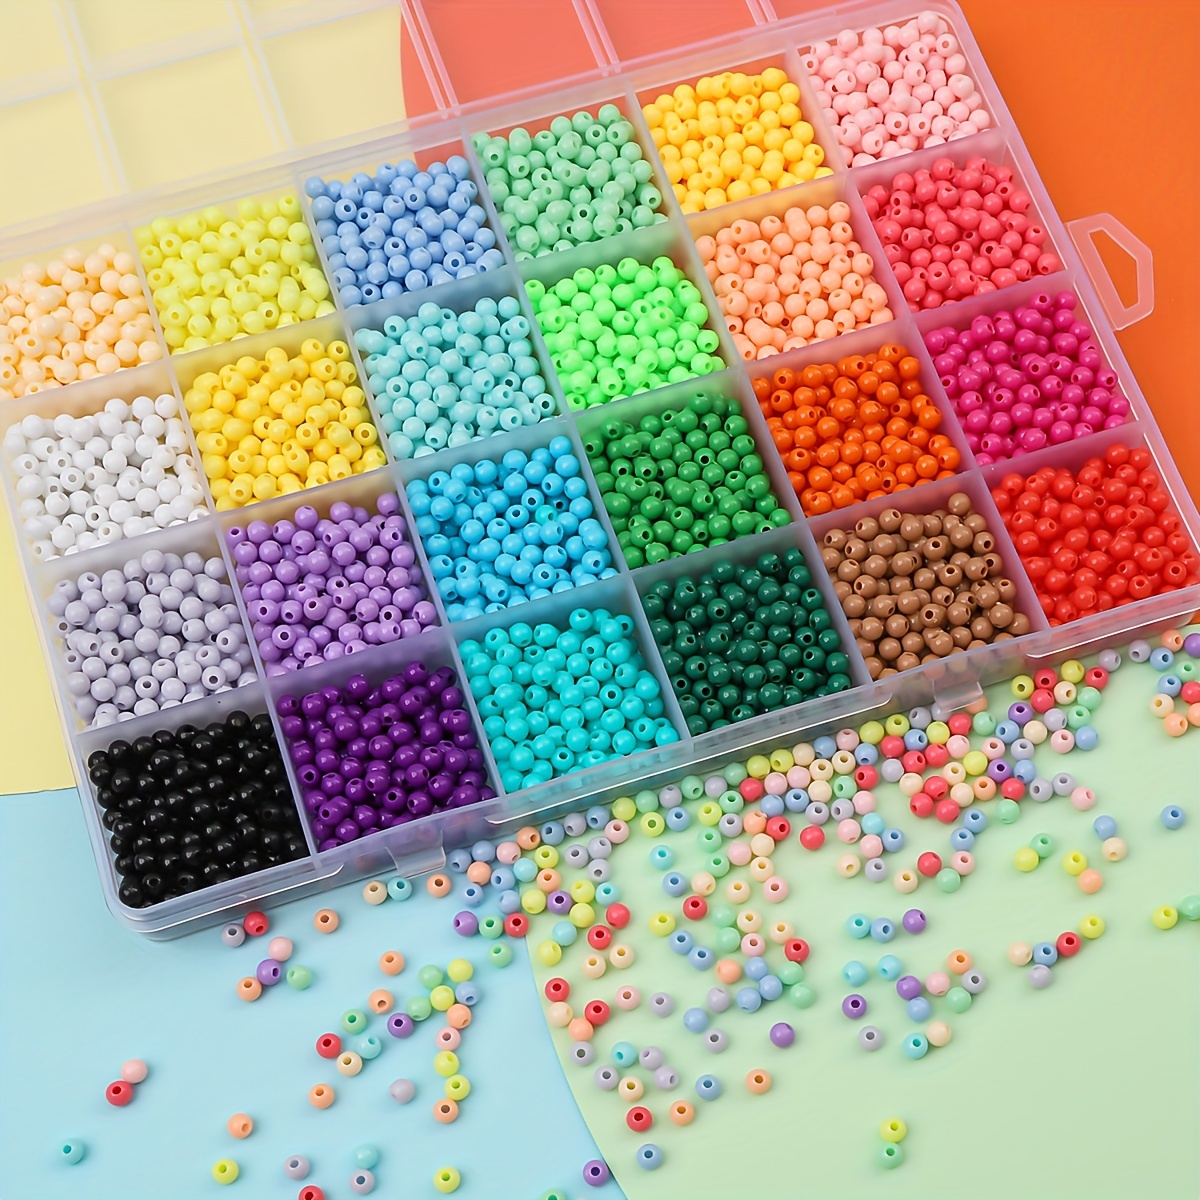 

300pcs 0.4cm 0.157in Mix Candy Colors Acrylic Round Beads For Jewelry Making Diy Necklace Bracelet Handmade Crafting Small Business Supplies